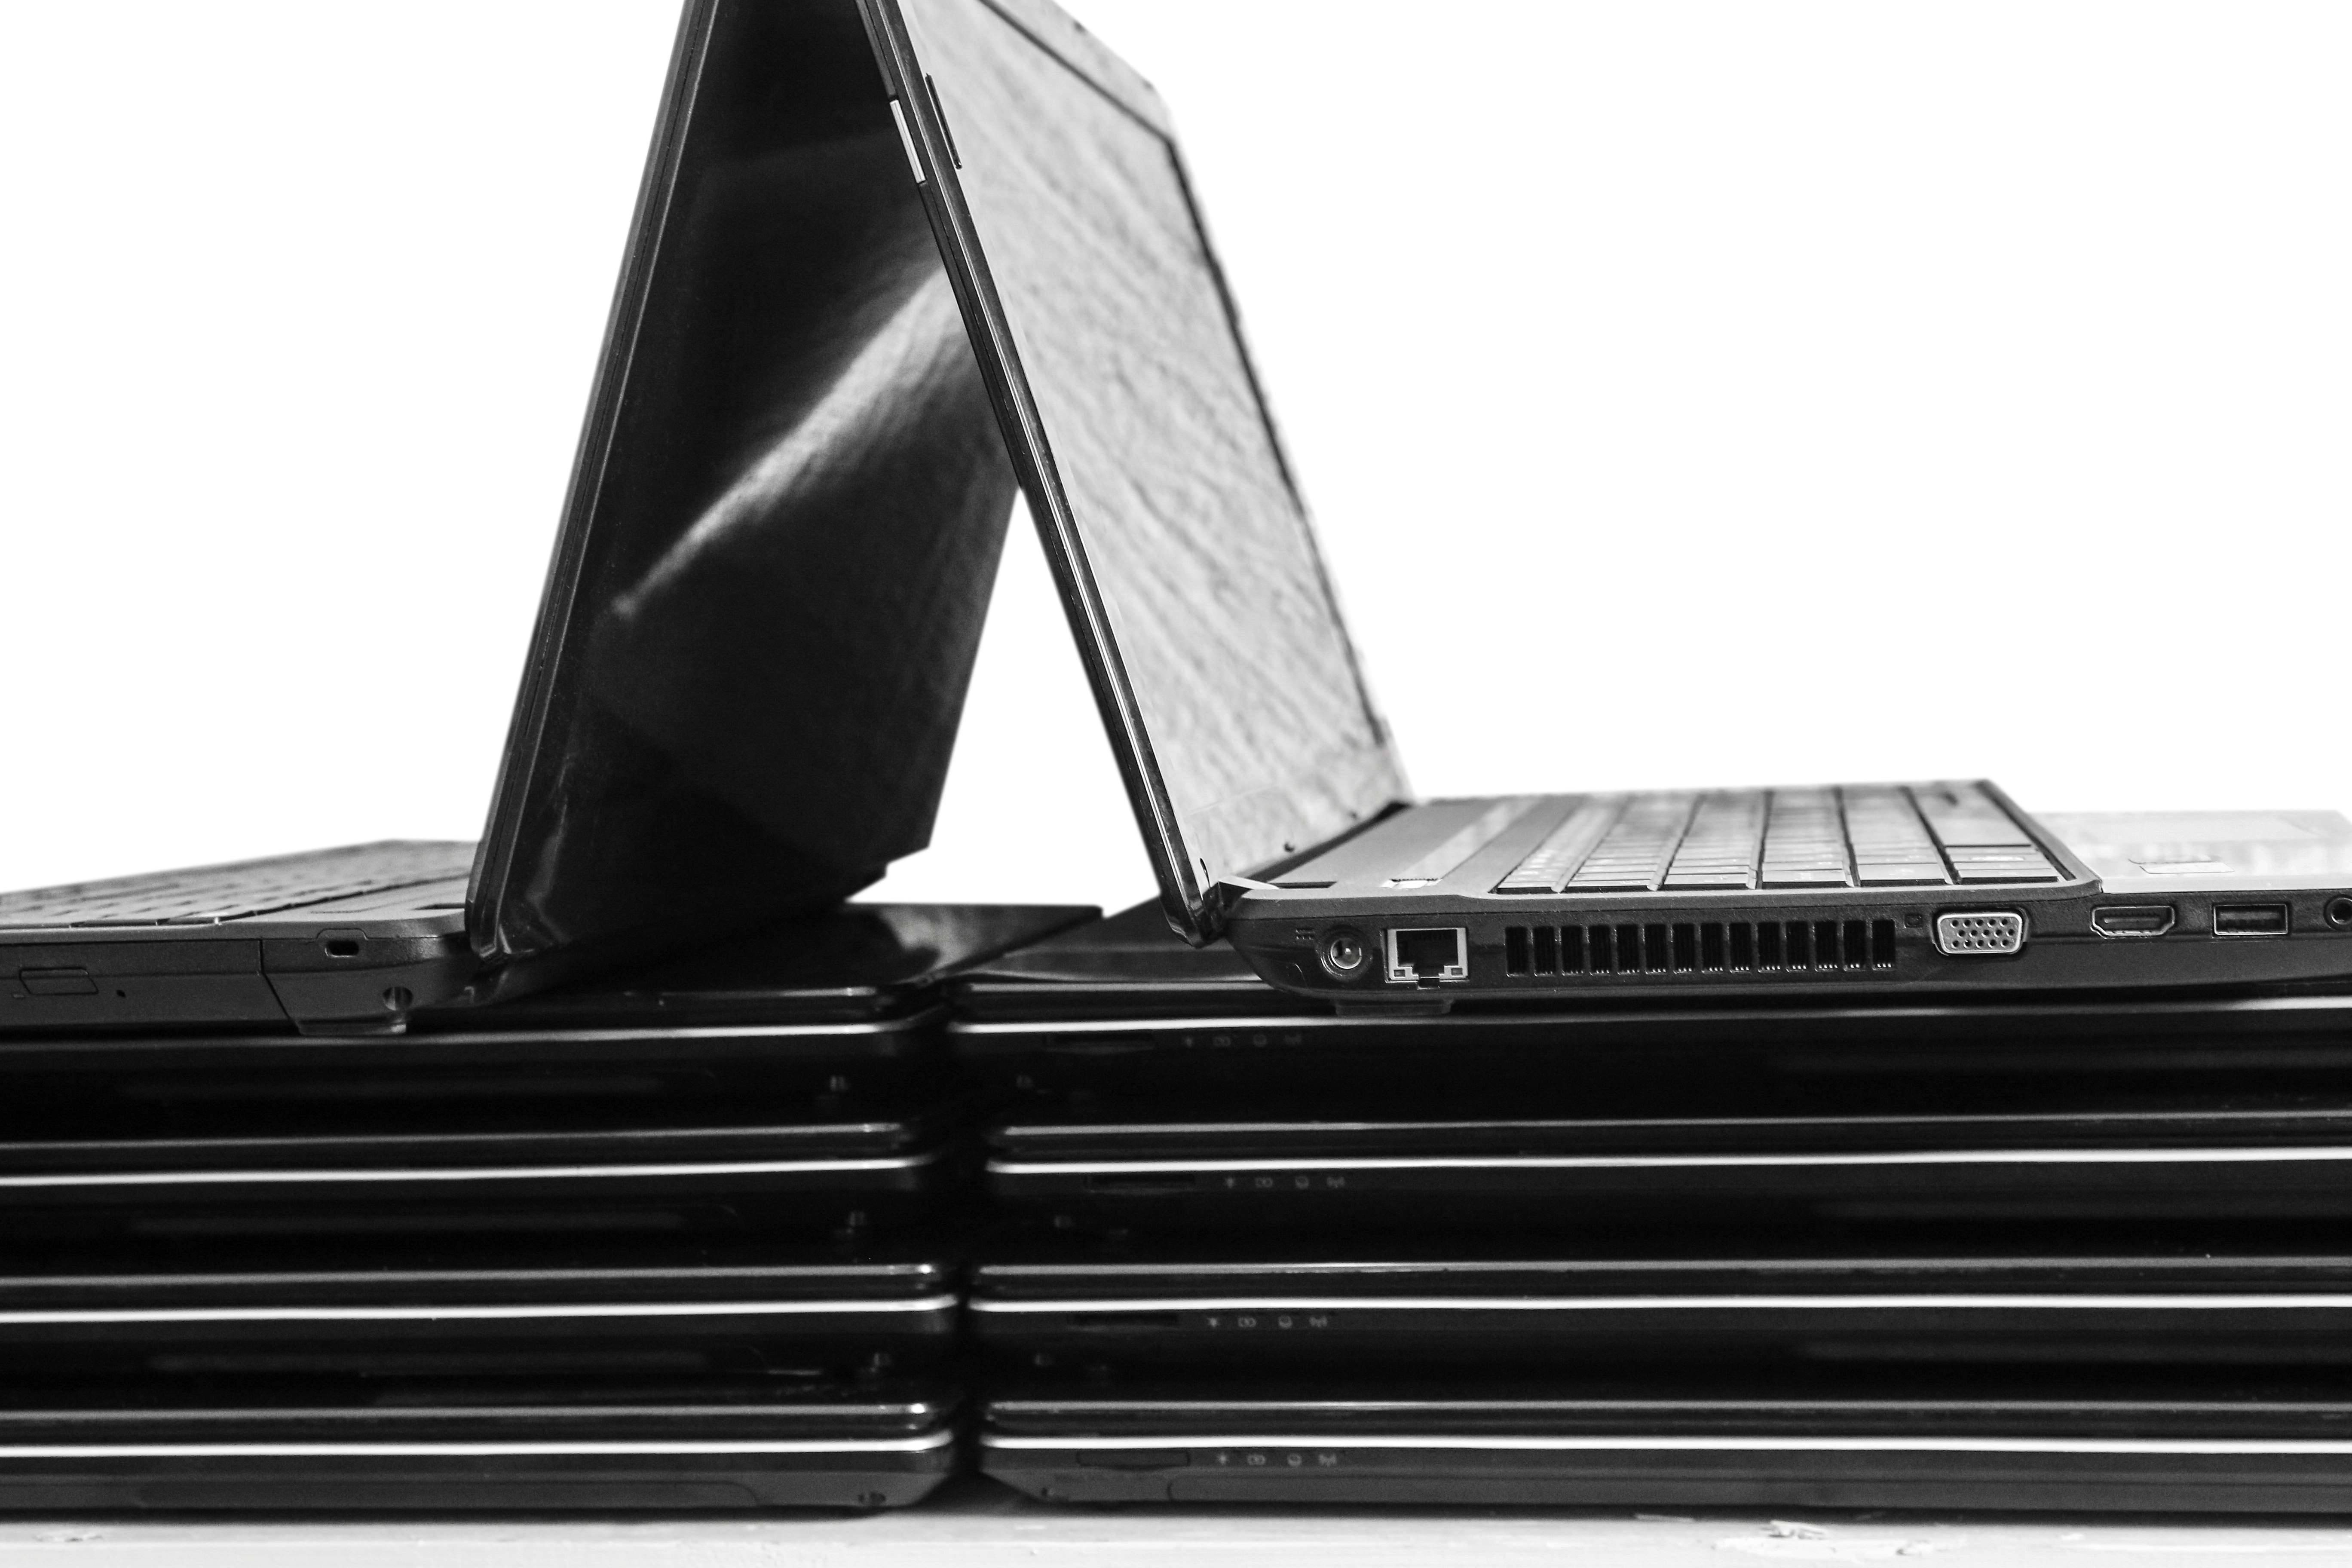 Pile of laptops